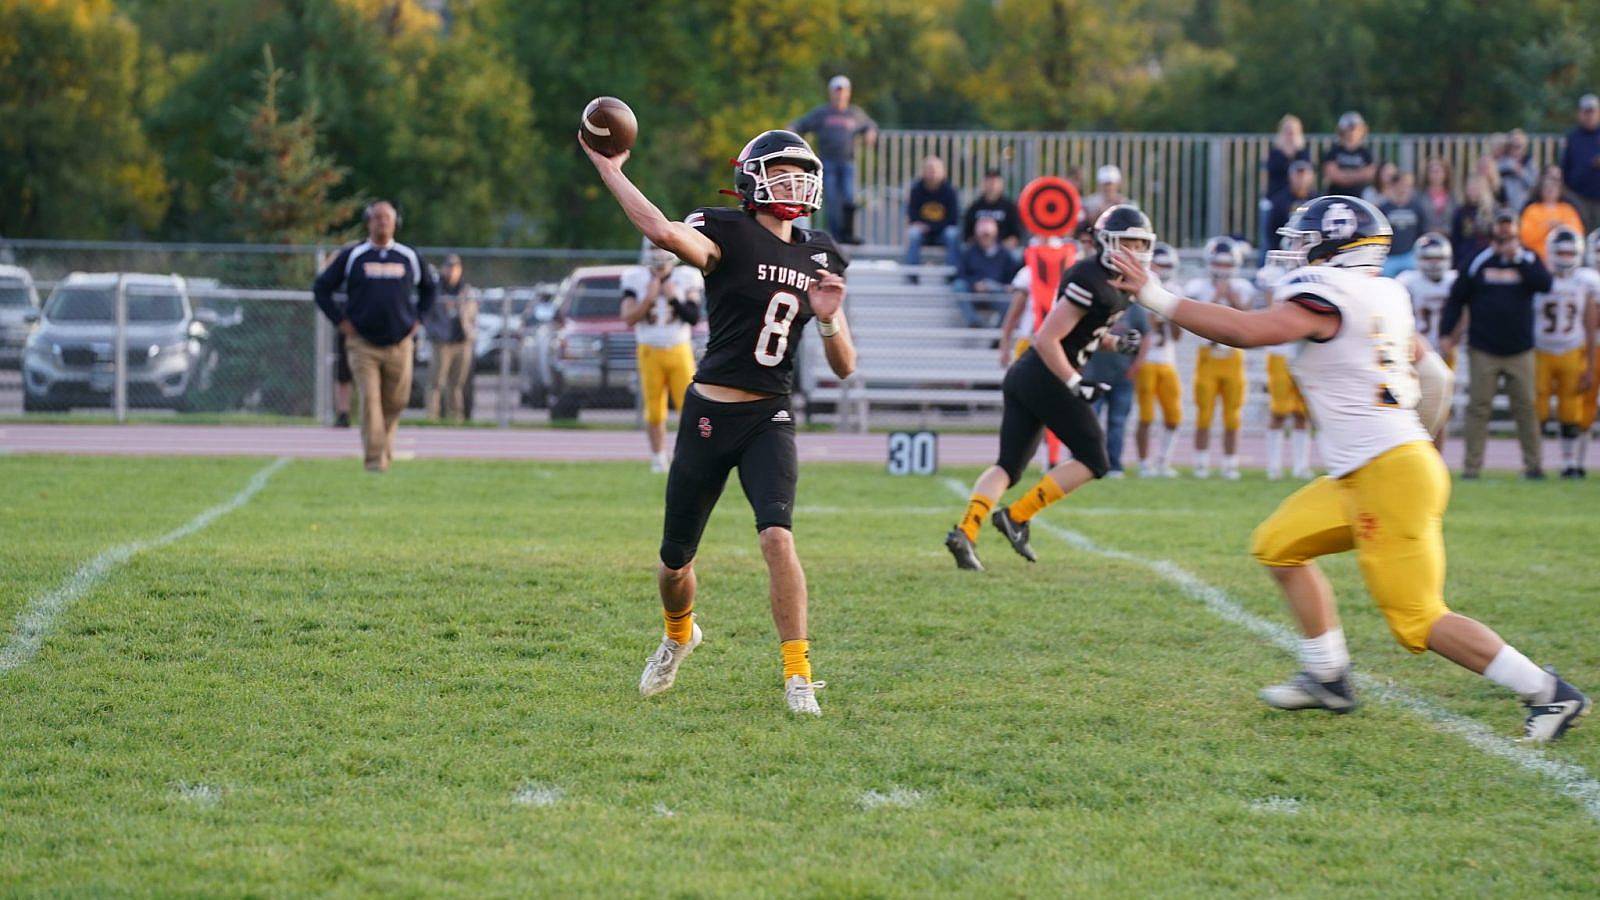 Scooper quarterback Aiden Hedderman looks to pass against Tea Area on Friday night at Woodle Field.